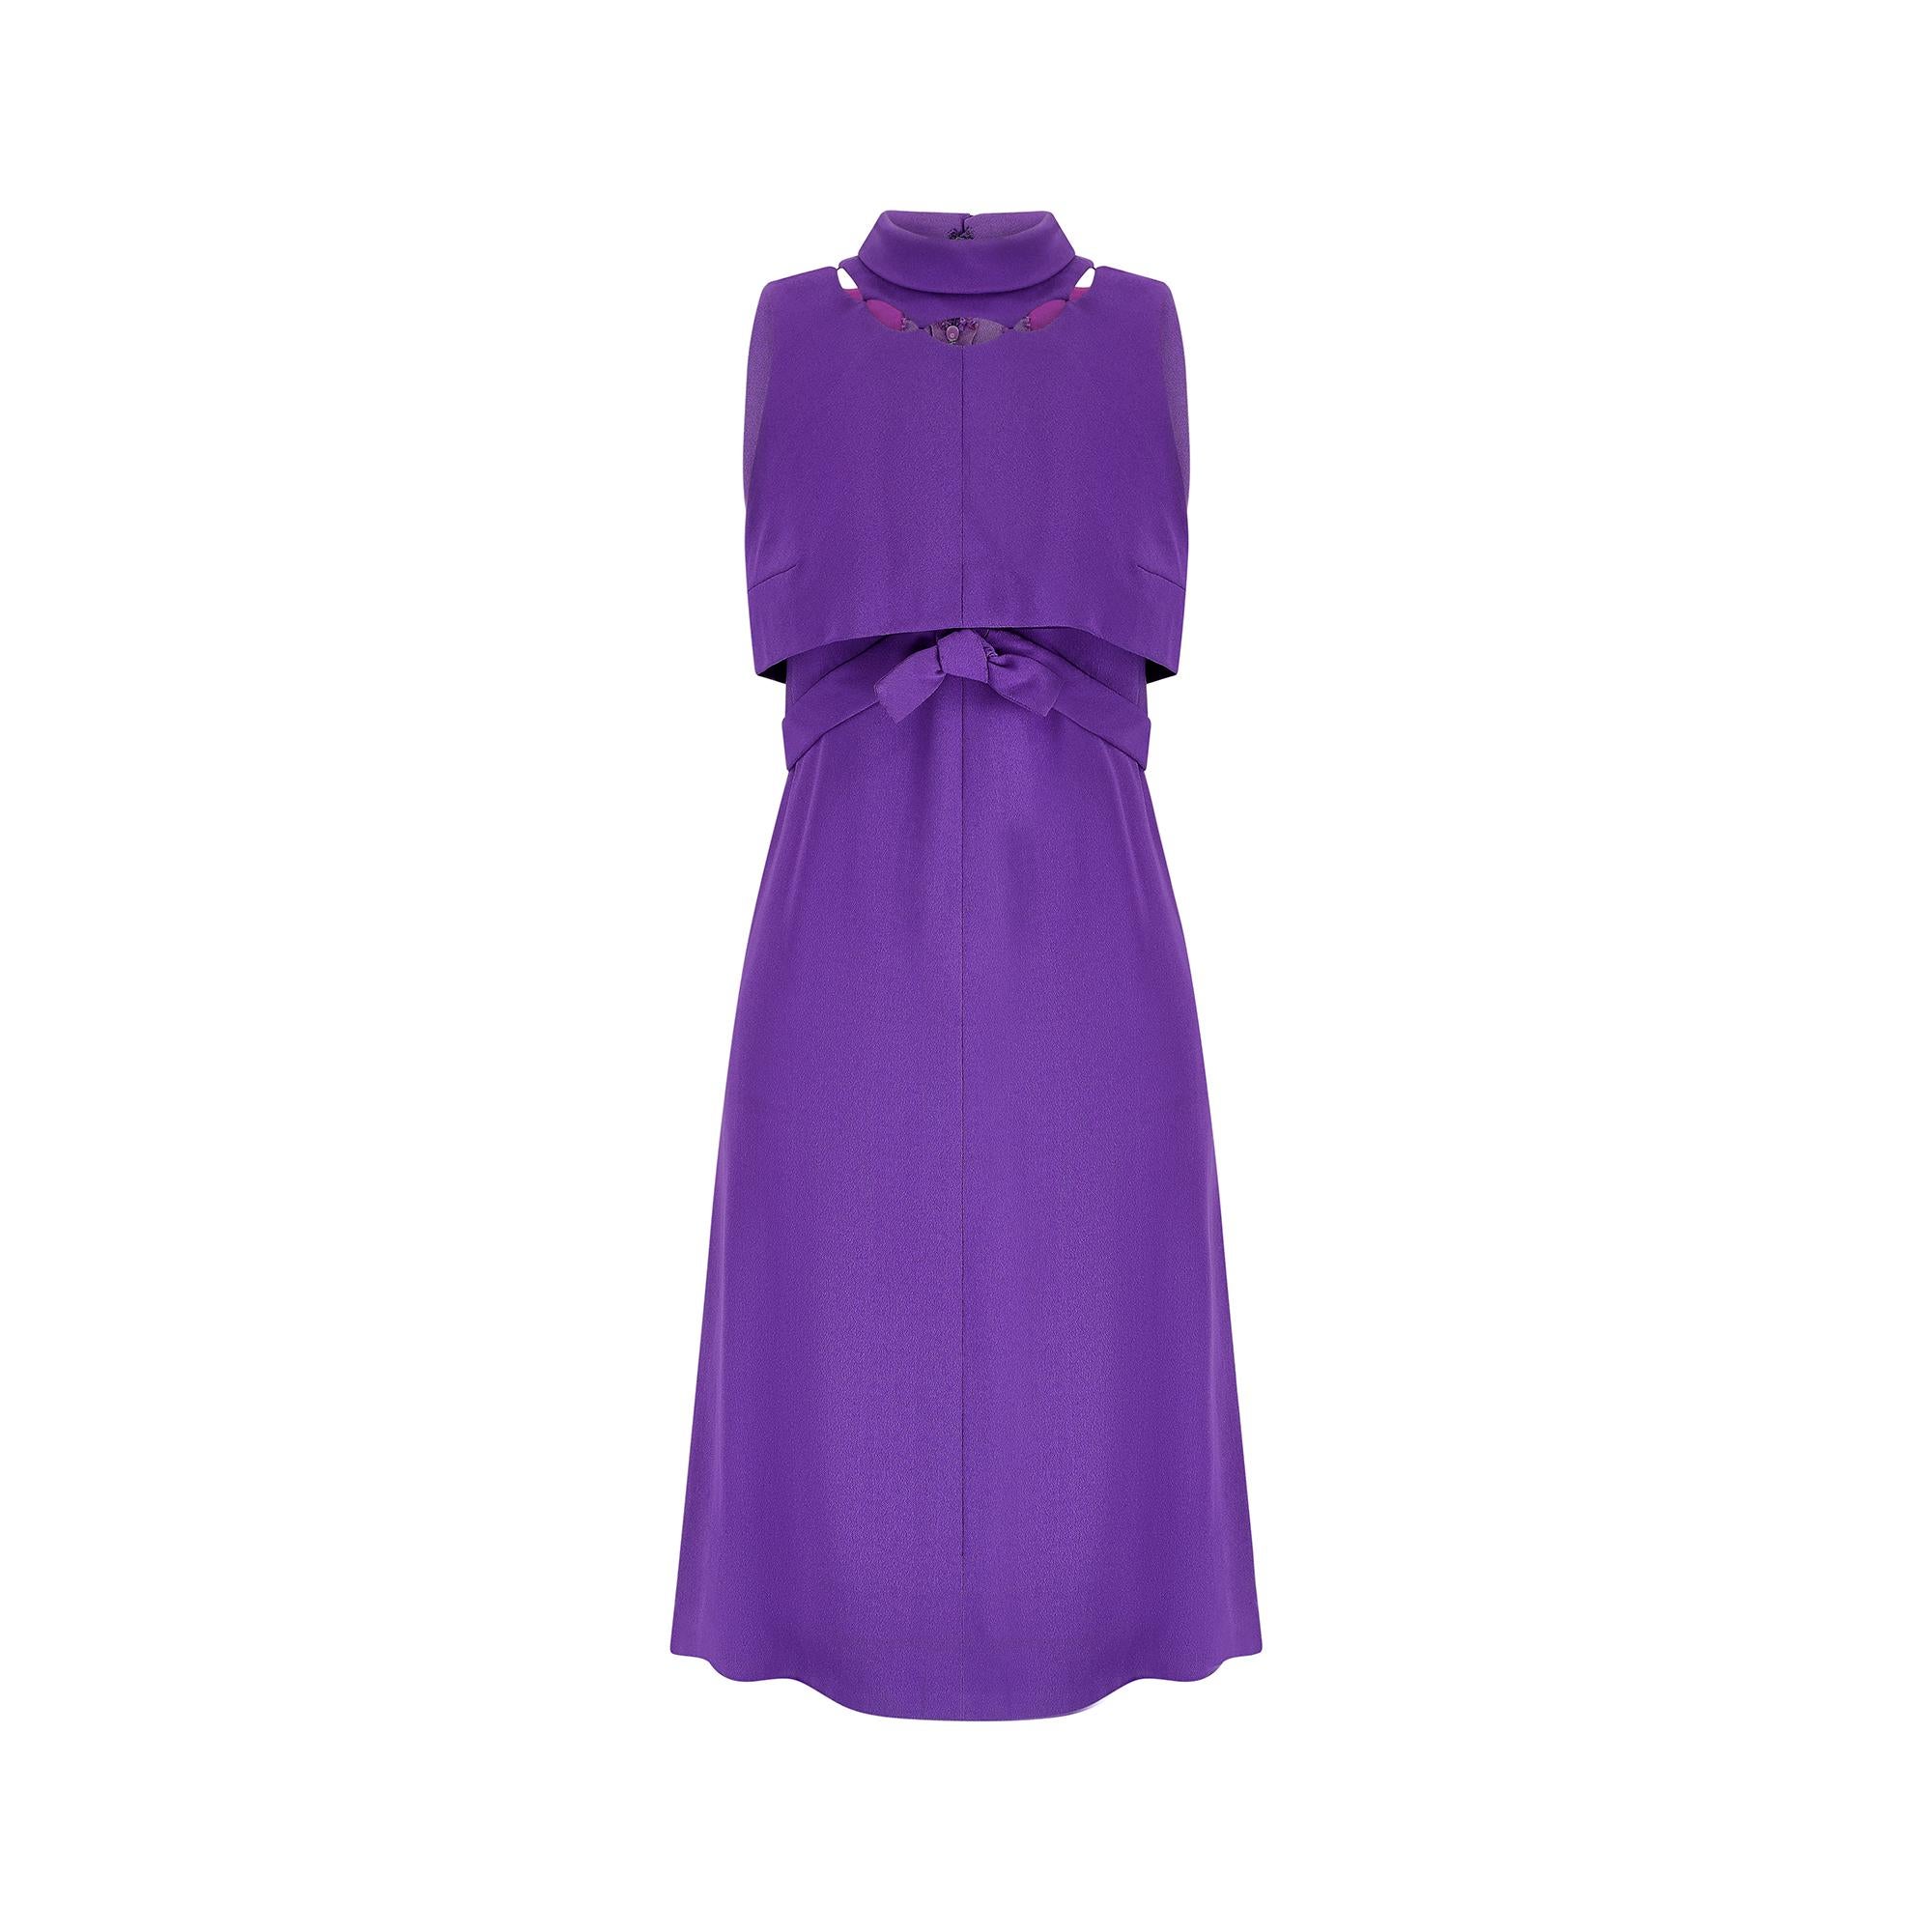 Cut from vibrant purple crepe, this exceptional 1960s dress is by Royal British couturiers - Rahvis.  Founded as a couture salon, “Rahvis Gowns”, in 1929, it was one of very few female-lead labels at this time. Run by two sisters, Raemonde and Dora,